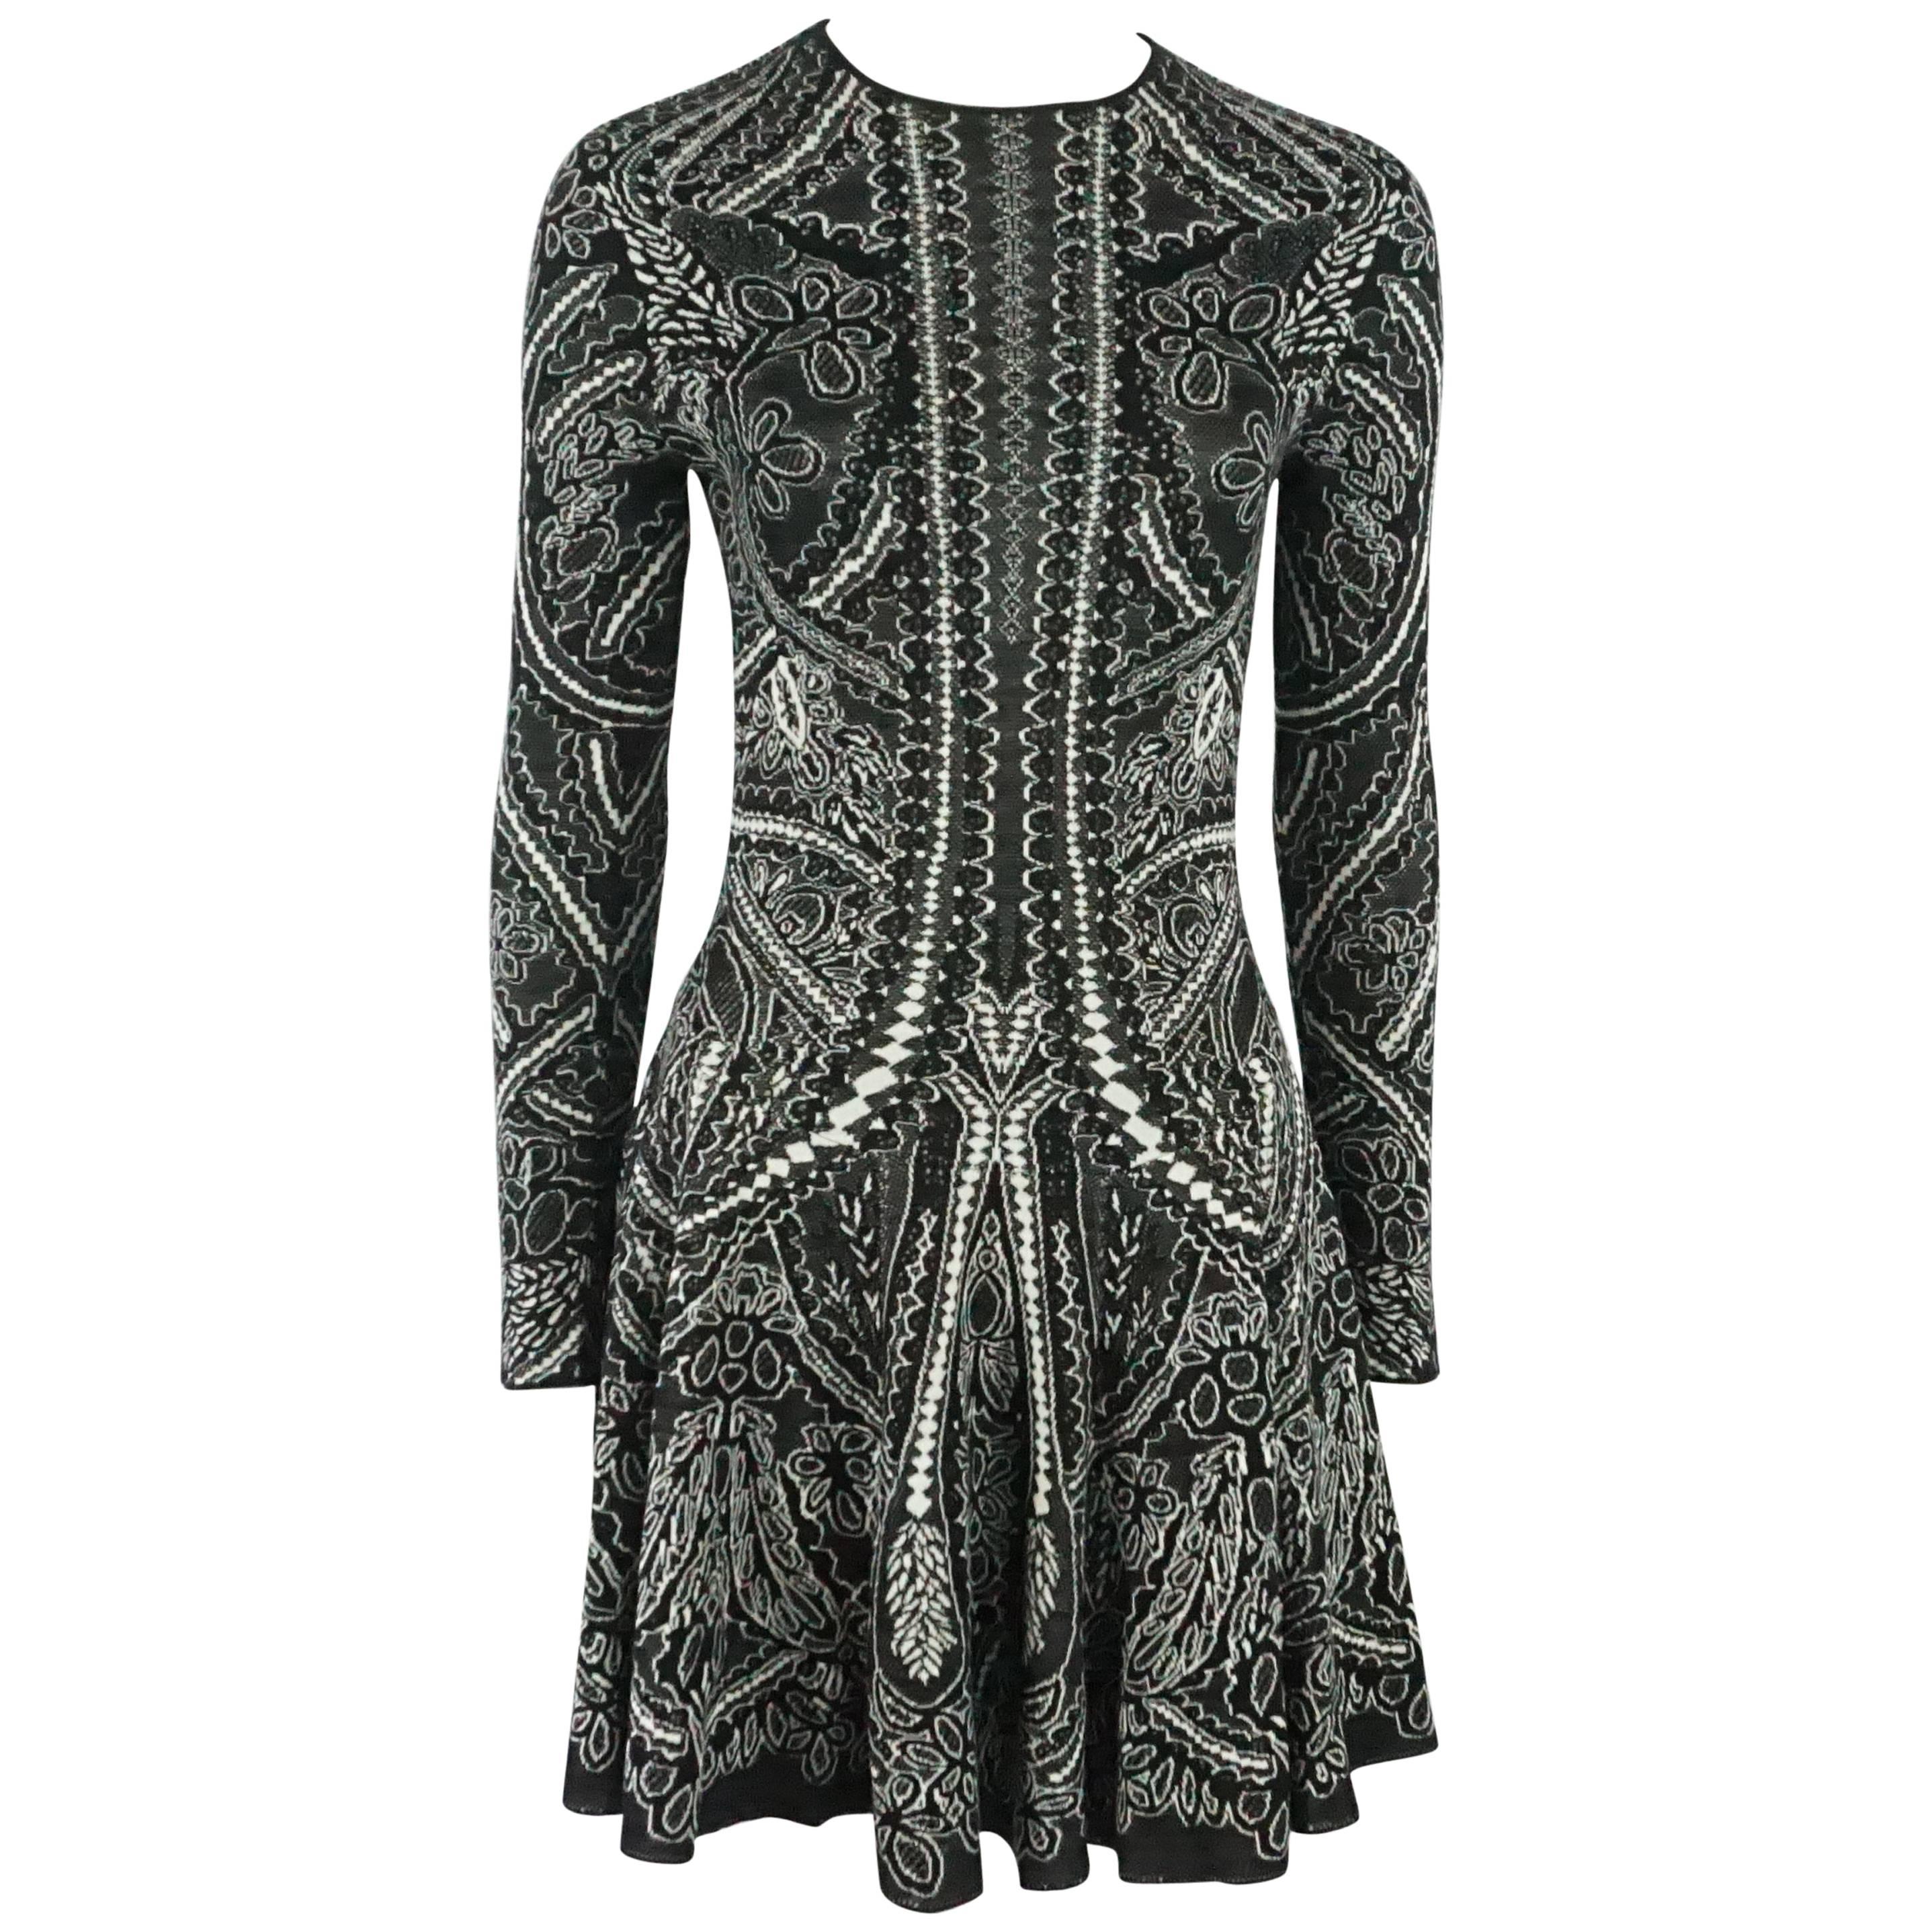 Alexander McQueen Black and Ivory Patterned Silk Knit Dress - Small